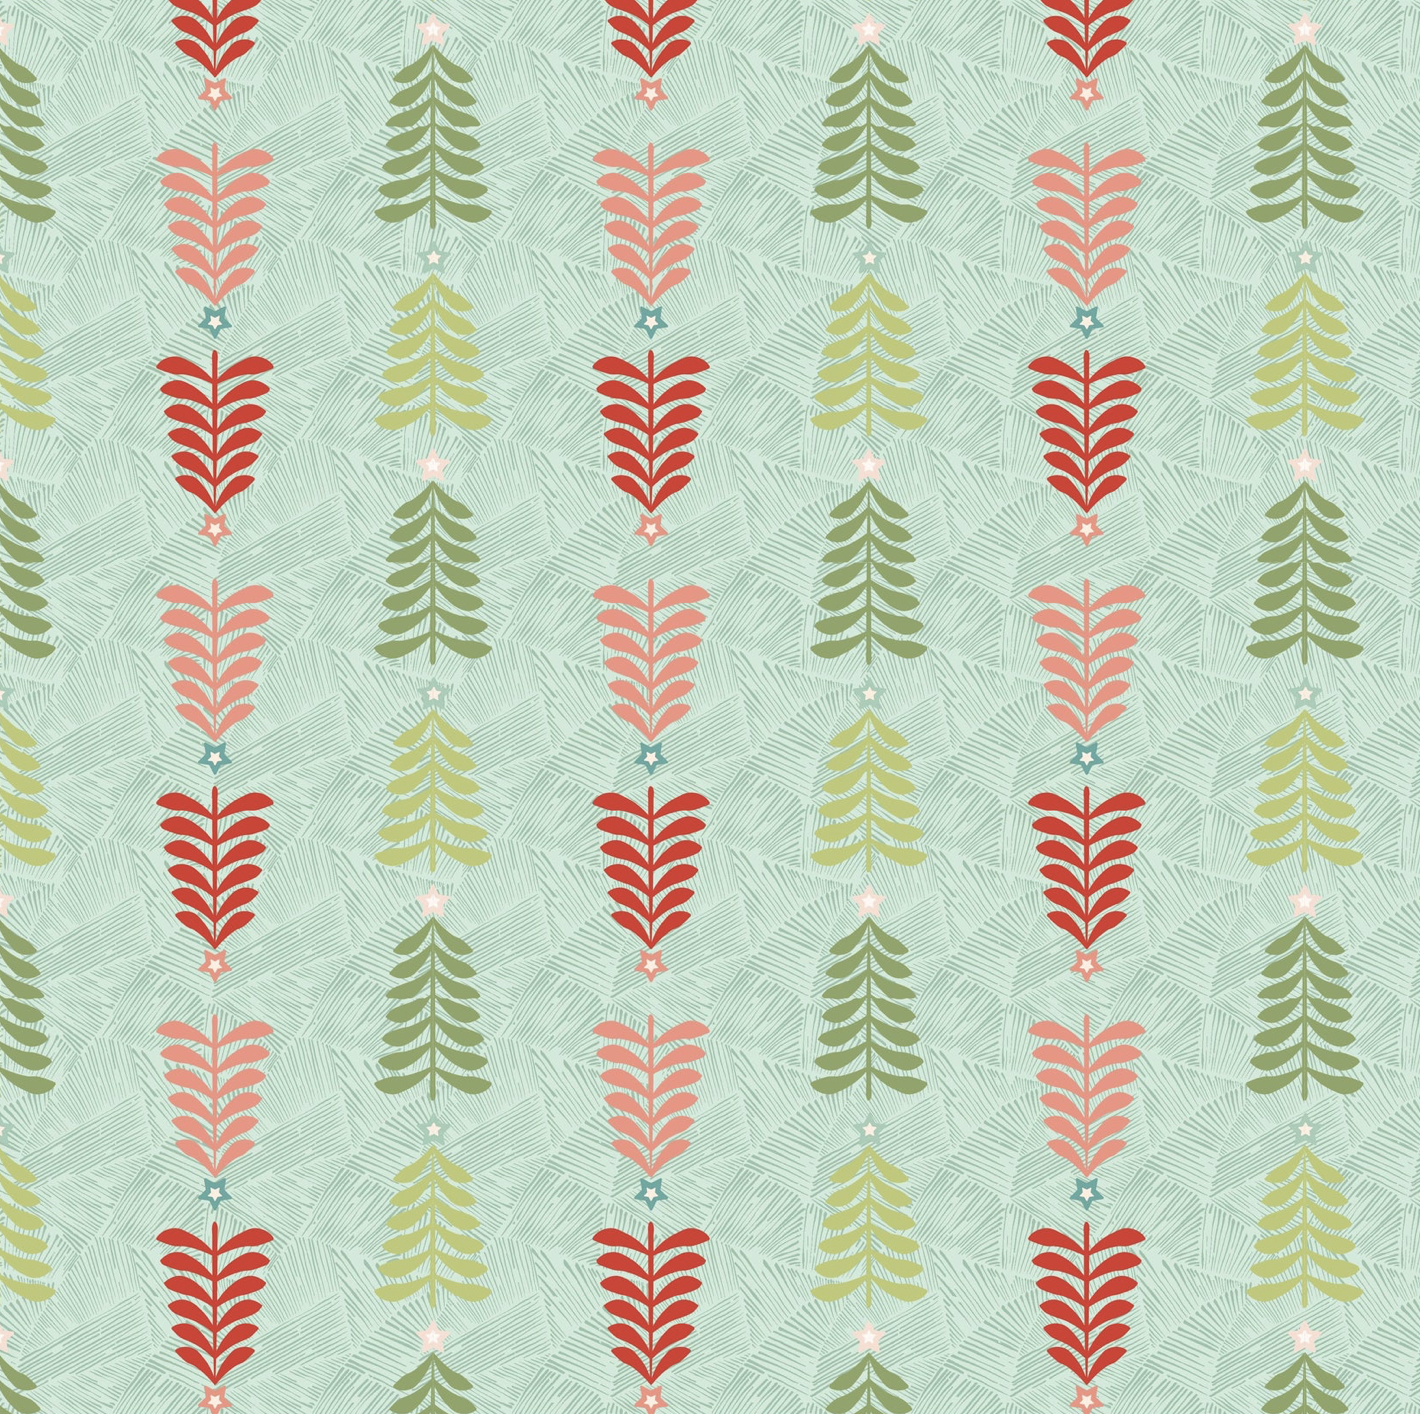 Prairie Christmas, Oh Christmas Tree Teal, PC24355, sold by the 1/2 yard, *PREORDER